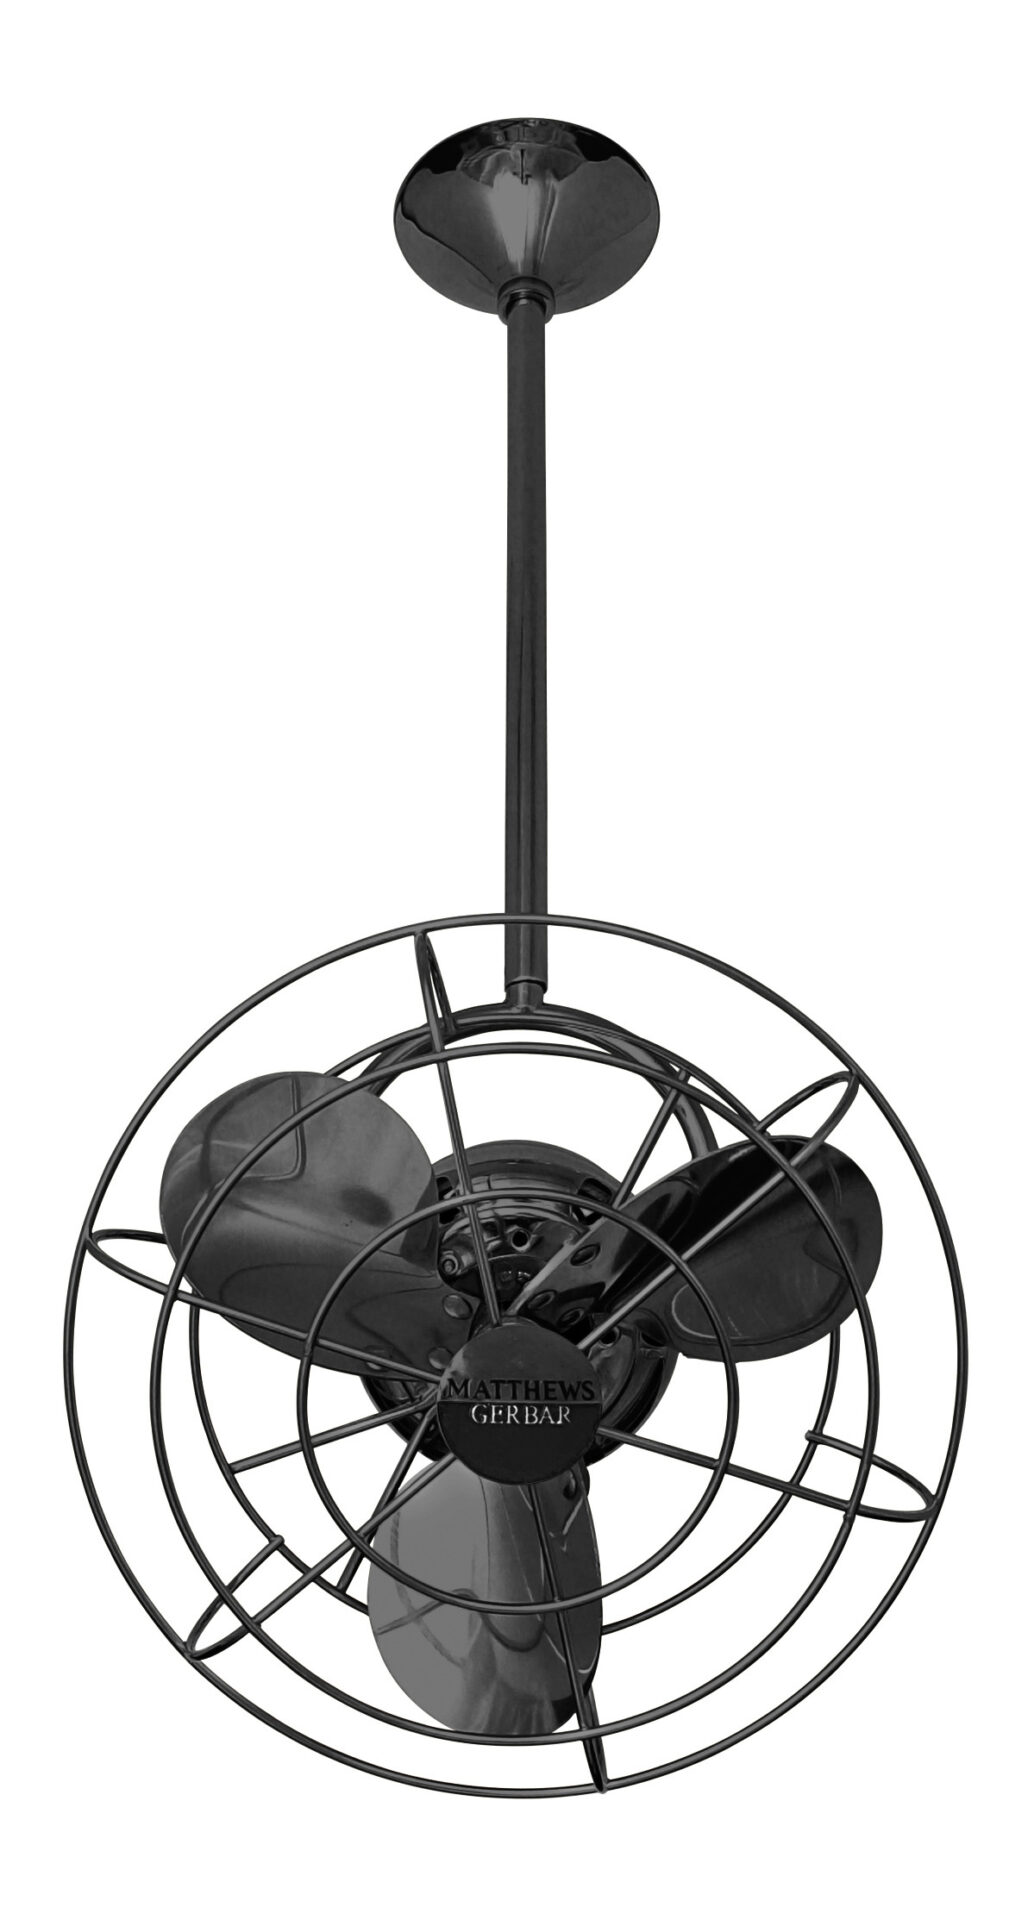 Bianca Direcional ceiling fan in Black Nickel with metal blades and decorative cage made by Matthews Fan Company.